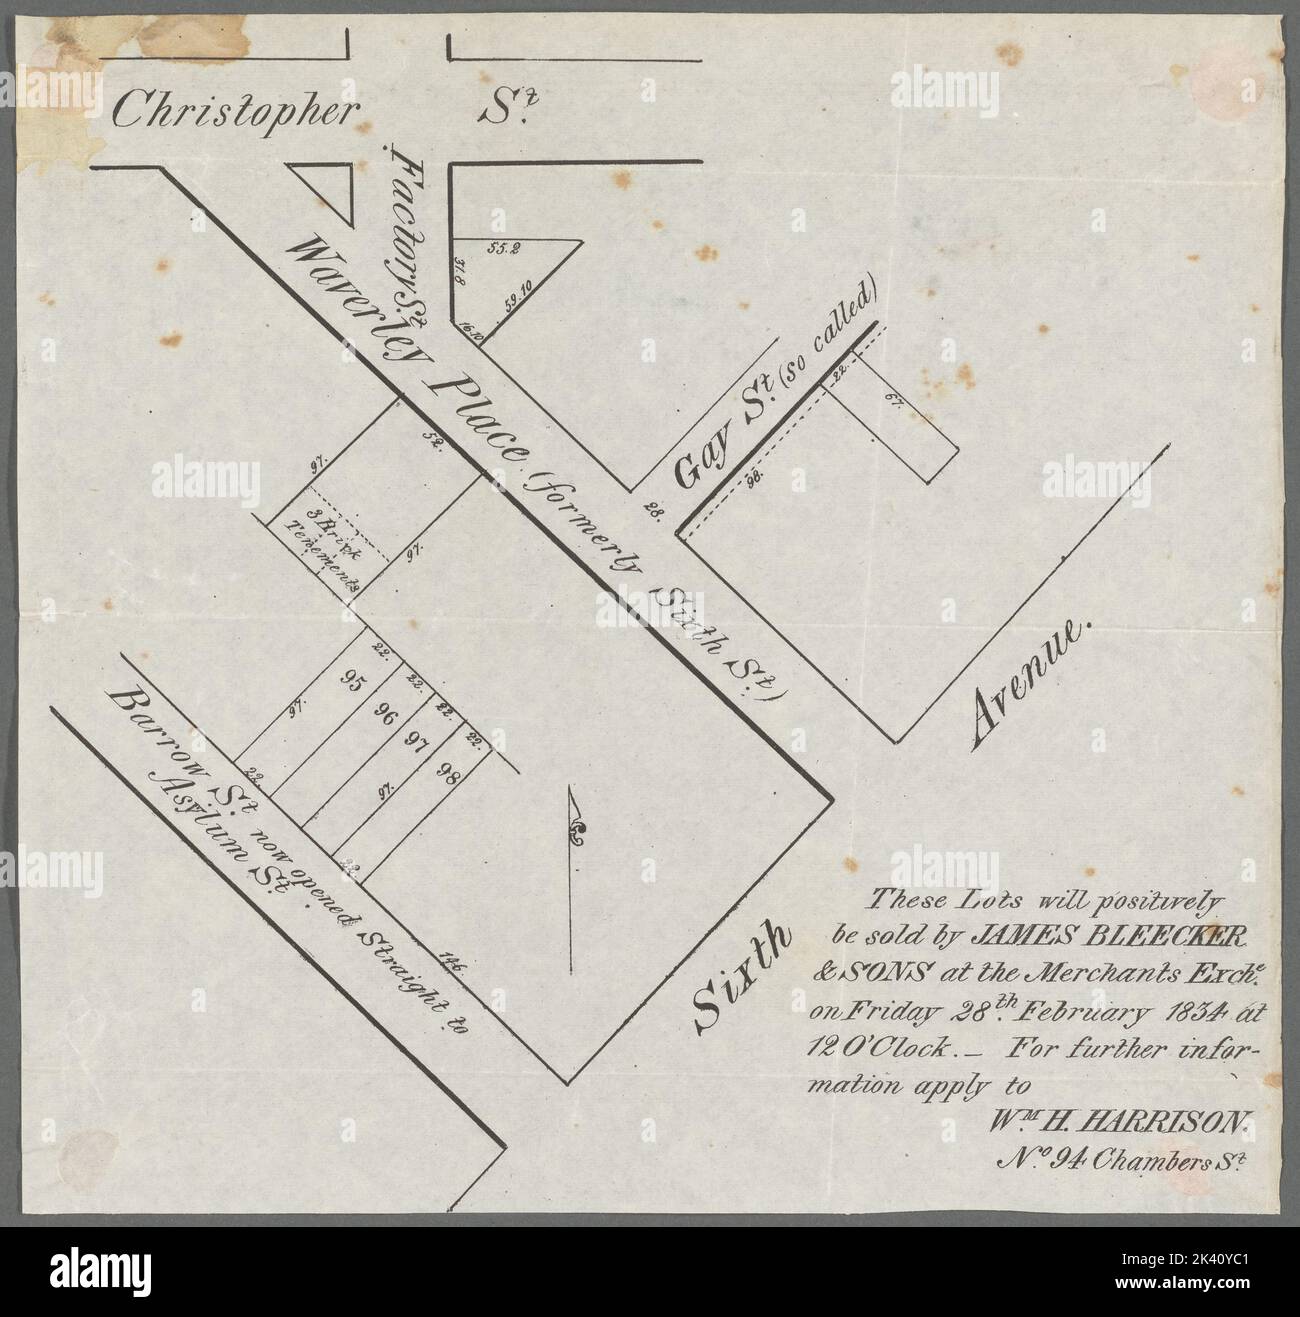 These lots will positively be sold by James Bleecker & Sons at the Merchants Exche., on Friday, 28th February, 1834, at 12 o'clock Cartographic. Cadastral maps, Maps. 1834. Lionel Pincus and Princess Firyal Map Division. United States , New York (State) , New York, Landowners , New York (State) , New York, Real property , New York (State) , New York, Real propery auctions , New York (State) , New York, West Village (New York, N.Y.), Manhattan (New York, N.Y.) Stock Photo